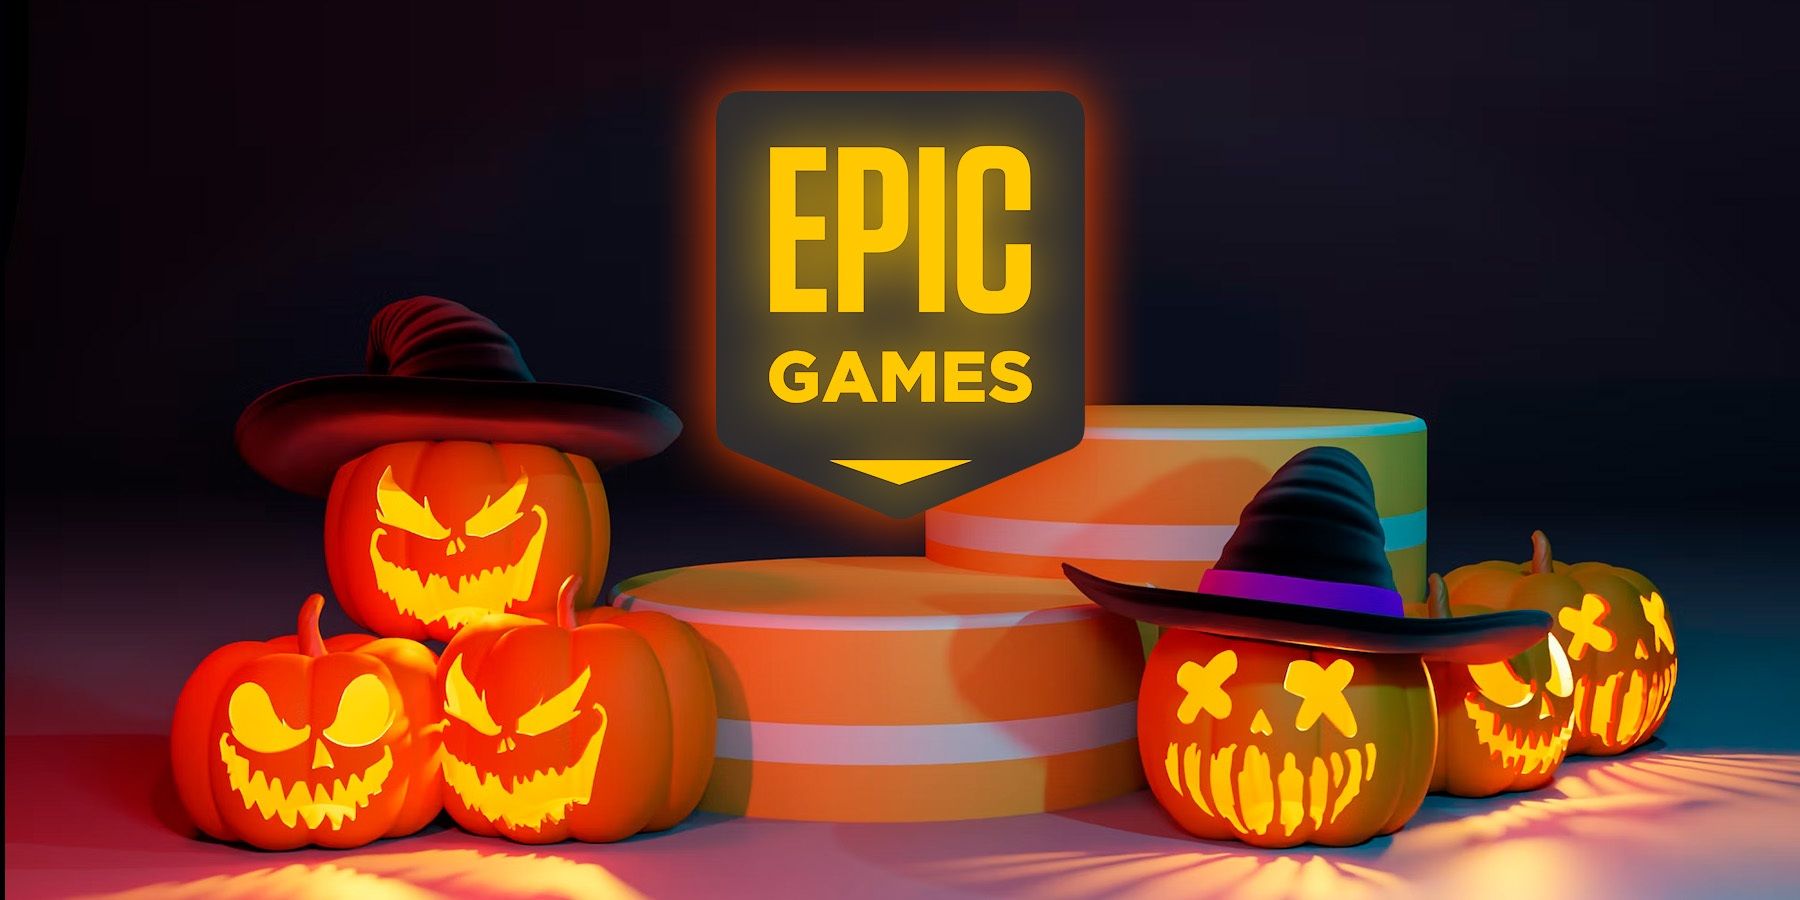 Epic Games Store Makes 2 Horror Games Free for Halloween